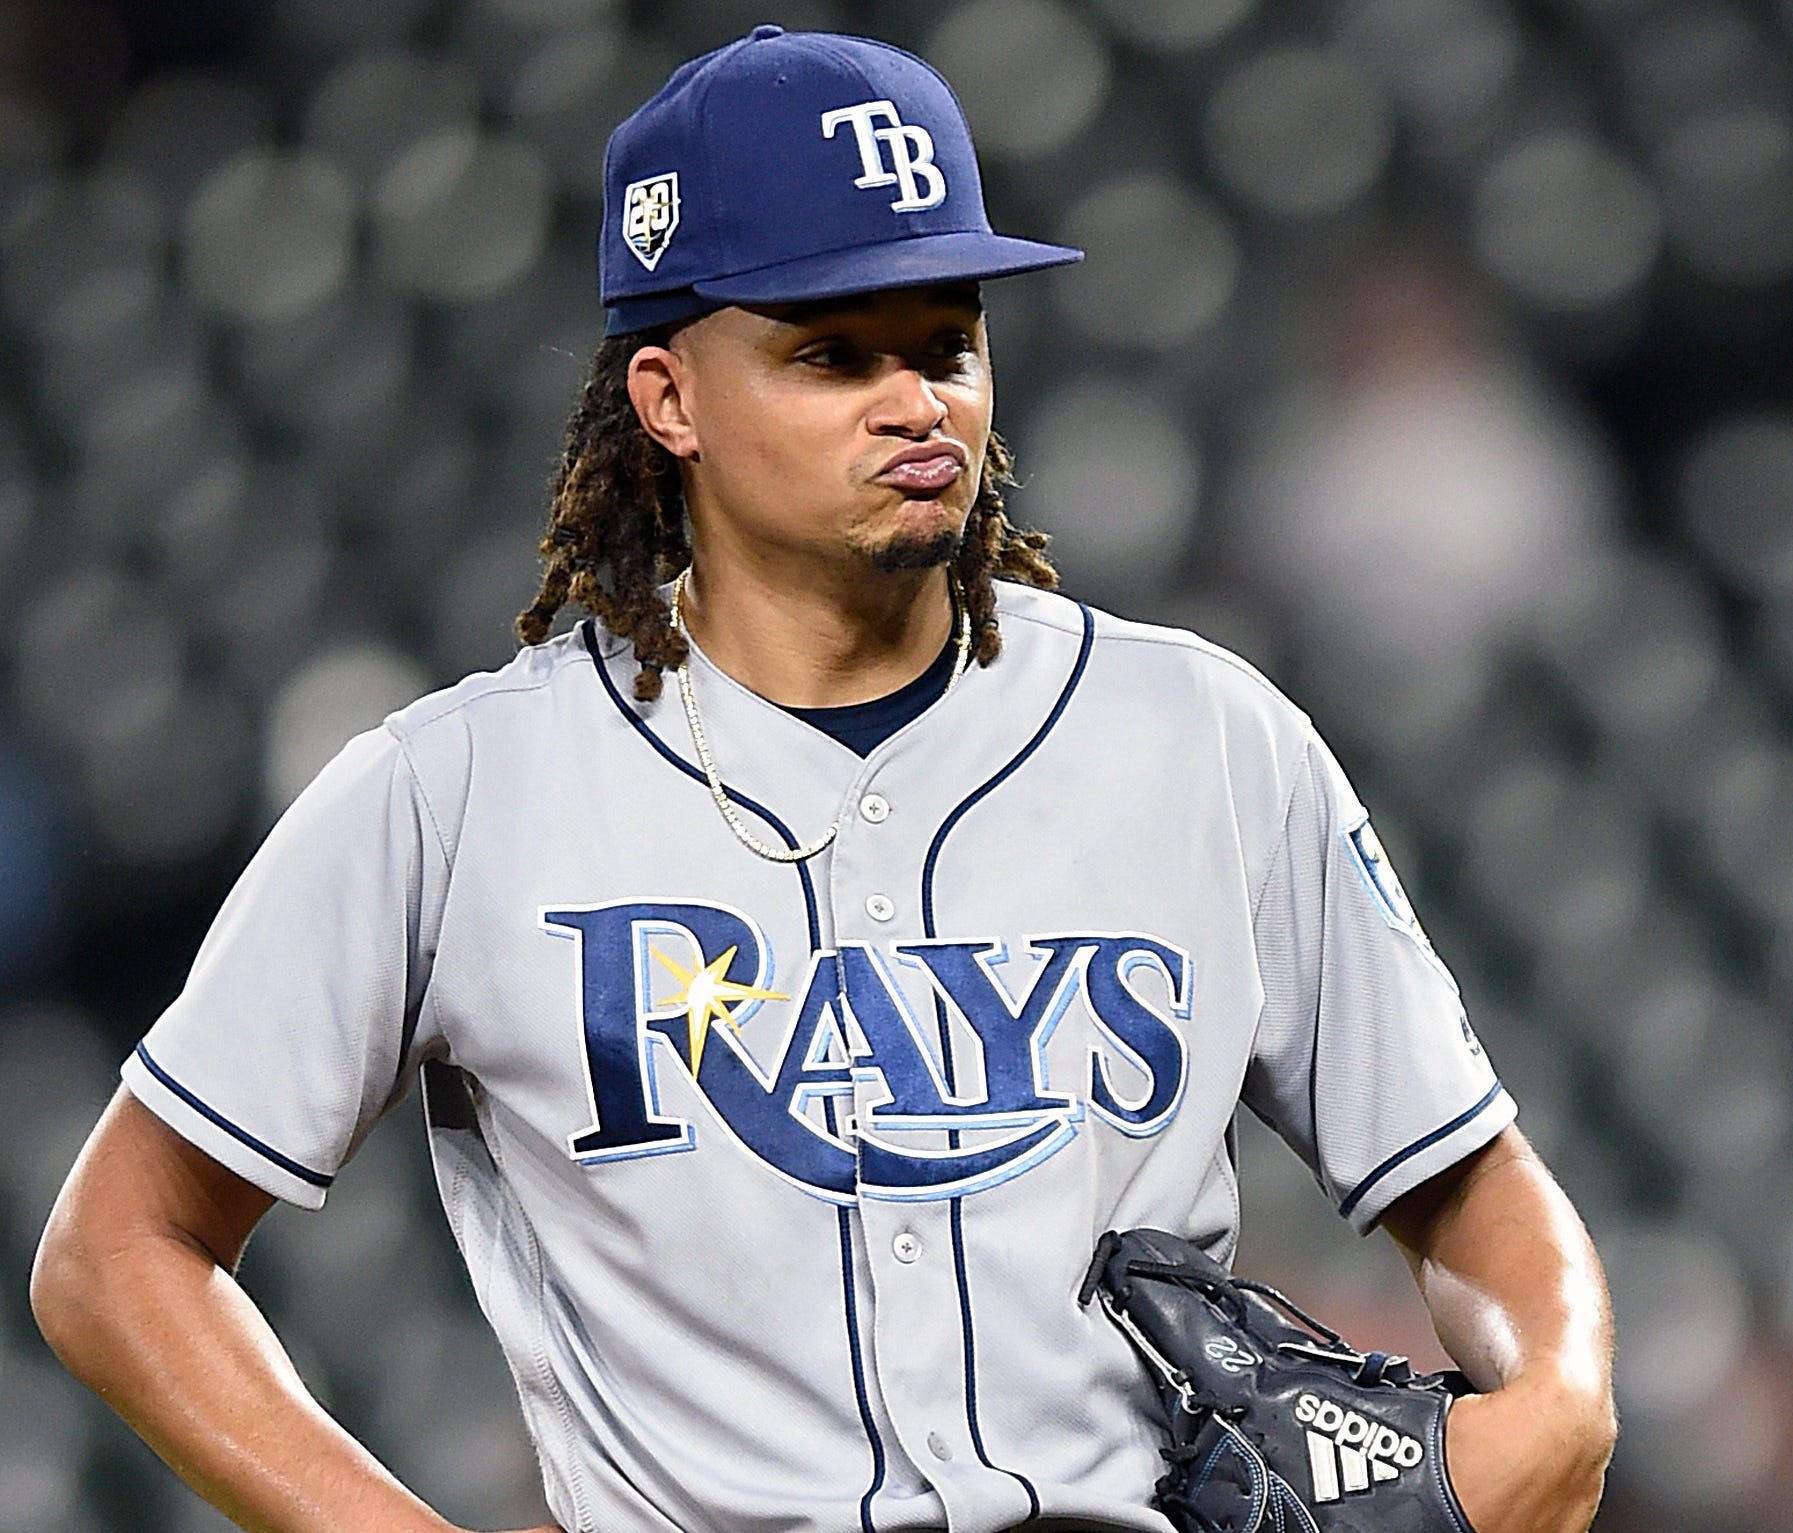 Tampa Bay Rays' Chris Archer reacts after giving up a base hit against the Baltimore Orioles in the fourth inning of a baseball game, Friday, July 27, 2018, in Baltimore. (AP Photo/Gail Burton)